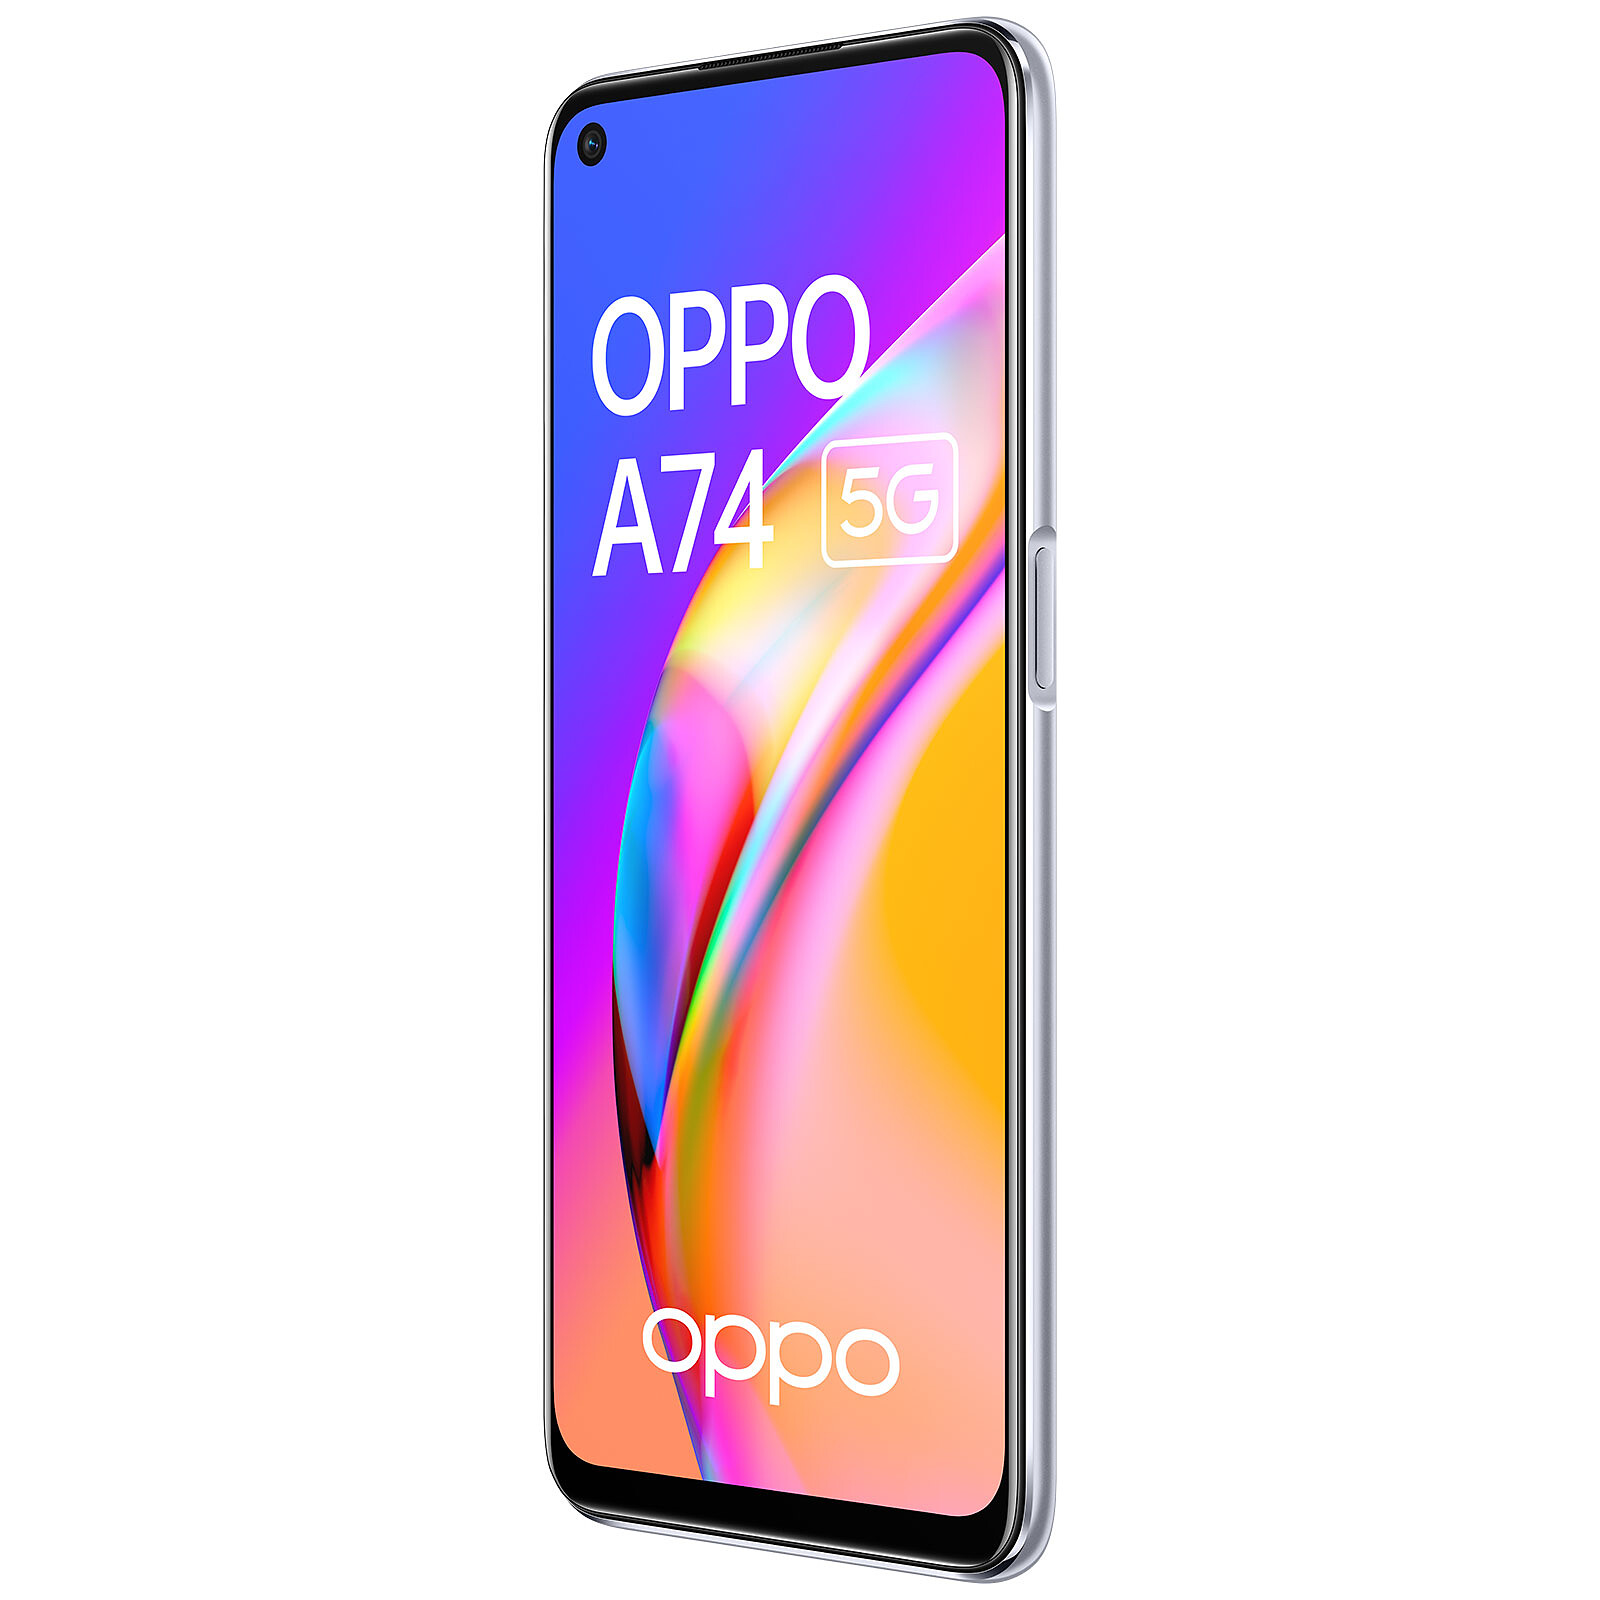 OPPO A74 5G Silver (6GB / 128GB) - Mobile phone & smartphone - LDLC 3-year  warranty